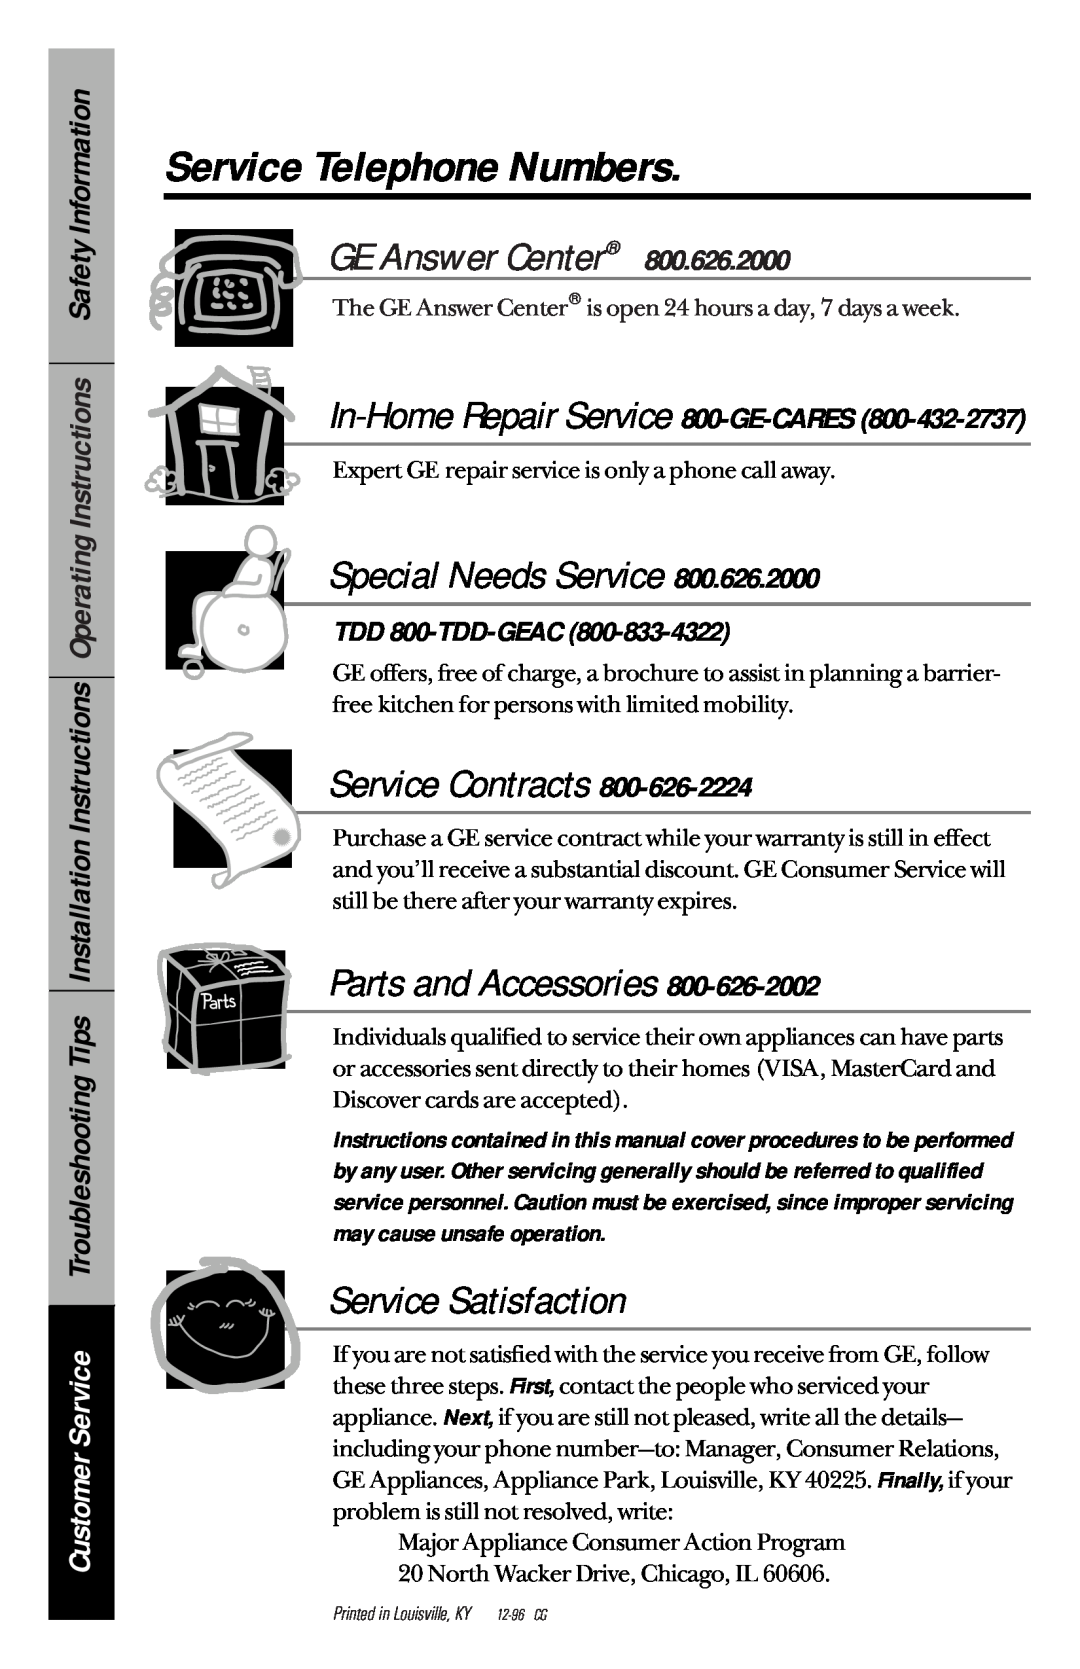 GE 49-8779 manual Service Telephone Numbers, In-Home Repair Service 800-GE-CARES, TDD 800-TDD-GEAC, GE Answer Center 